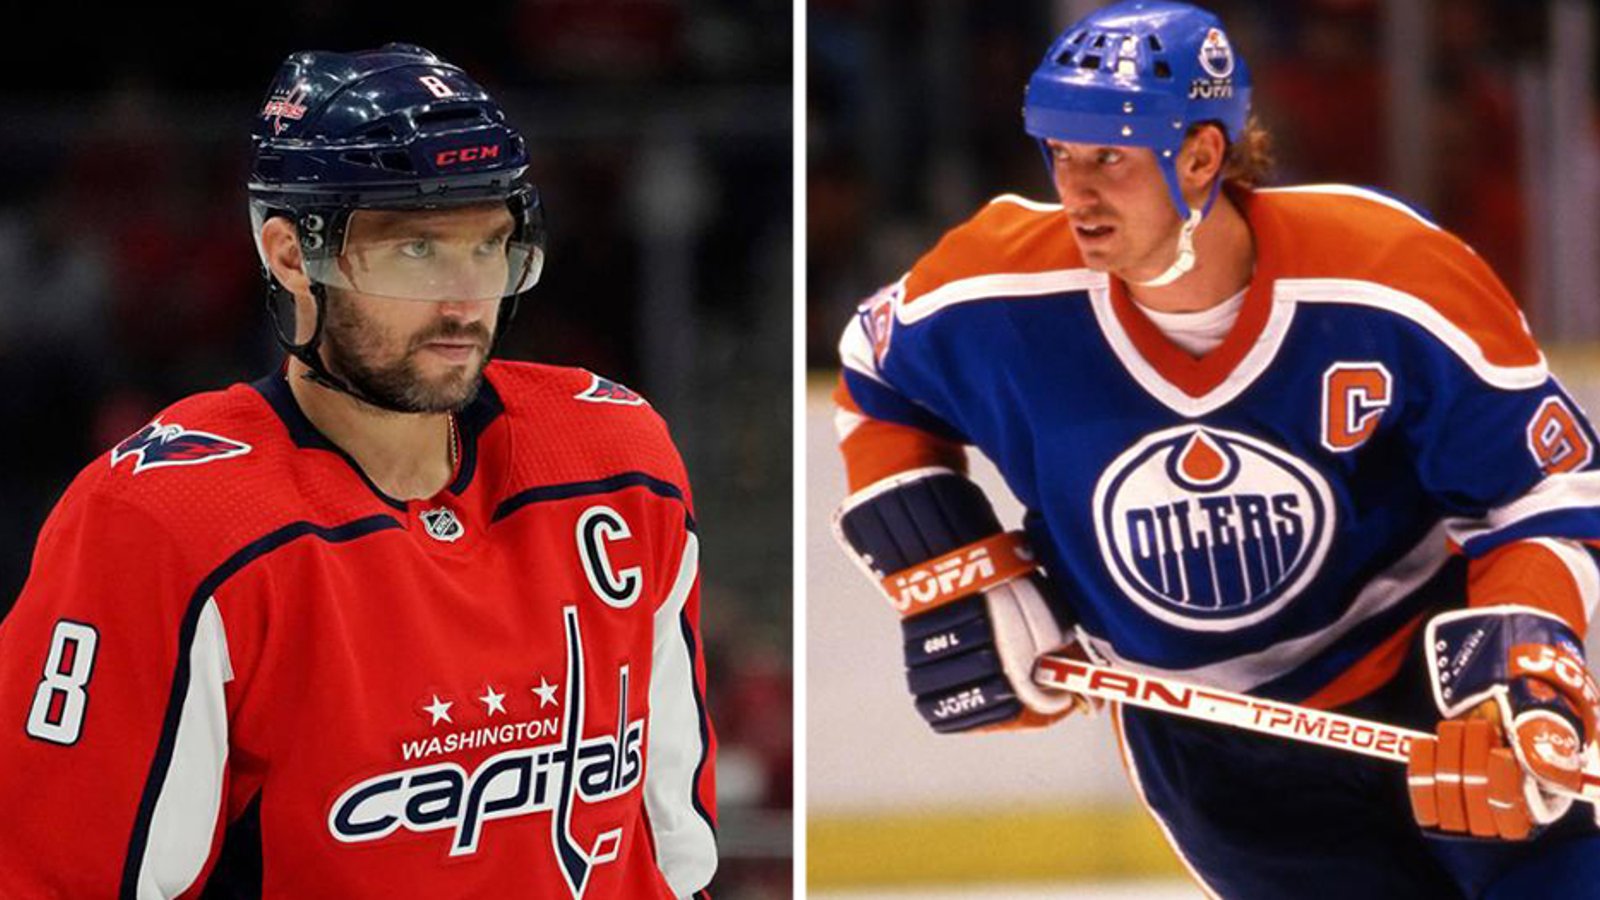 Gretzky vs Ovechkin go head to head this April 22nd